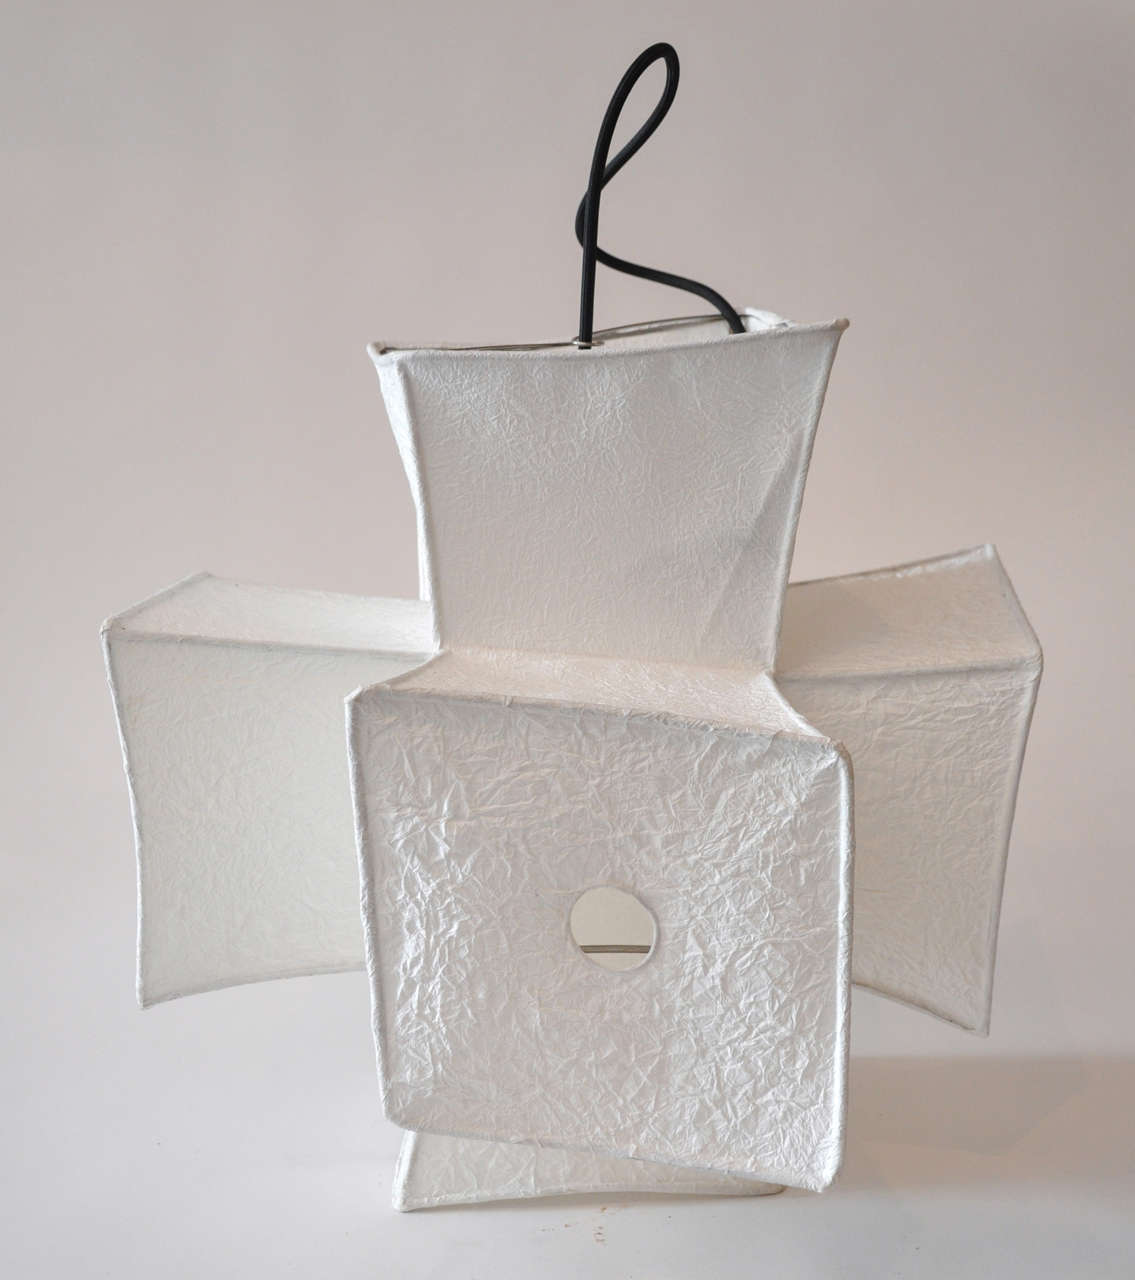 Contemporary Light Fixture and Paper Lantern by Andrew Stansell